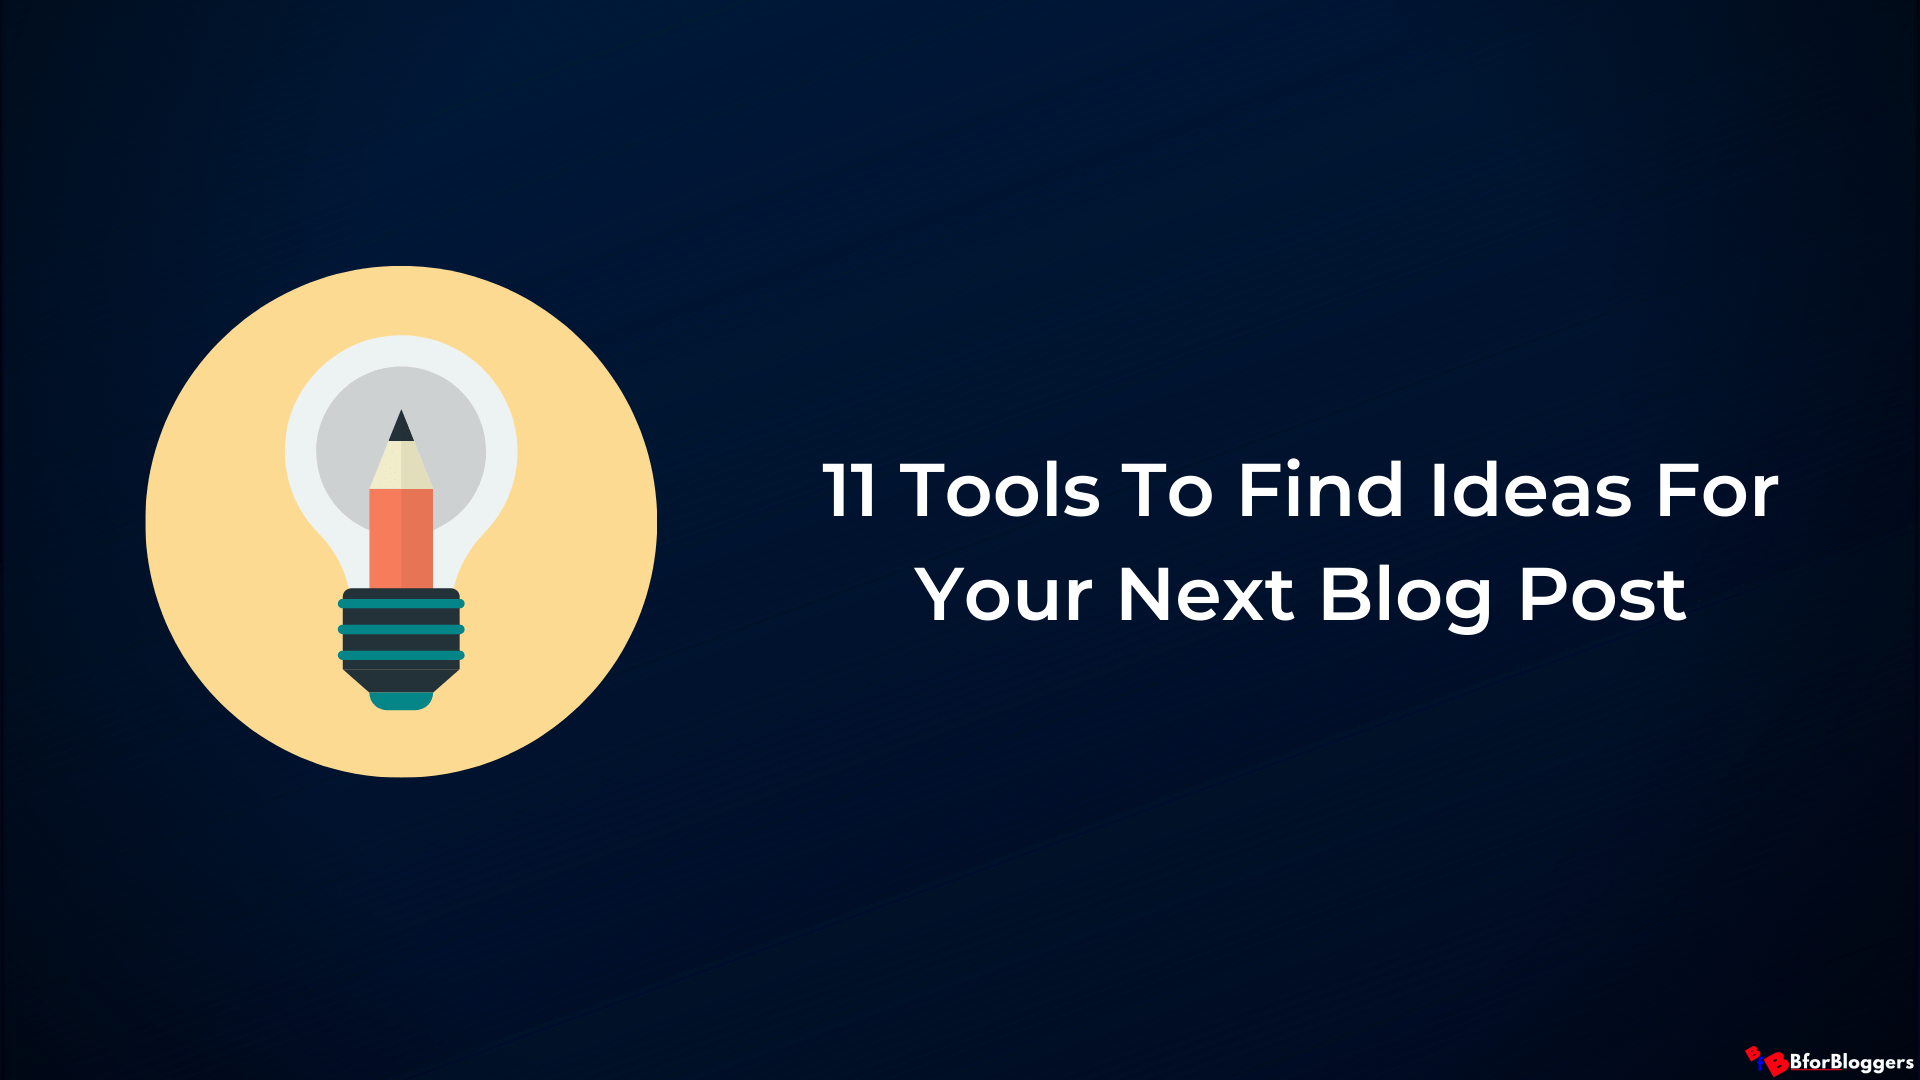 11 Best Tools To Discover New Topics for Your Blog